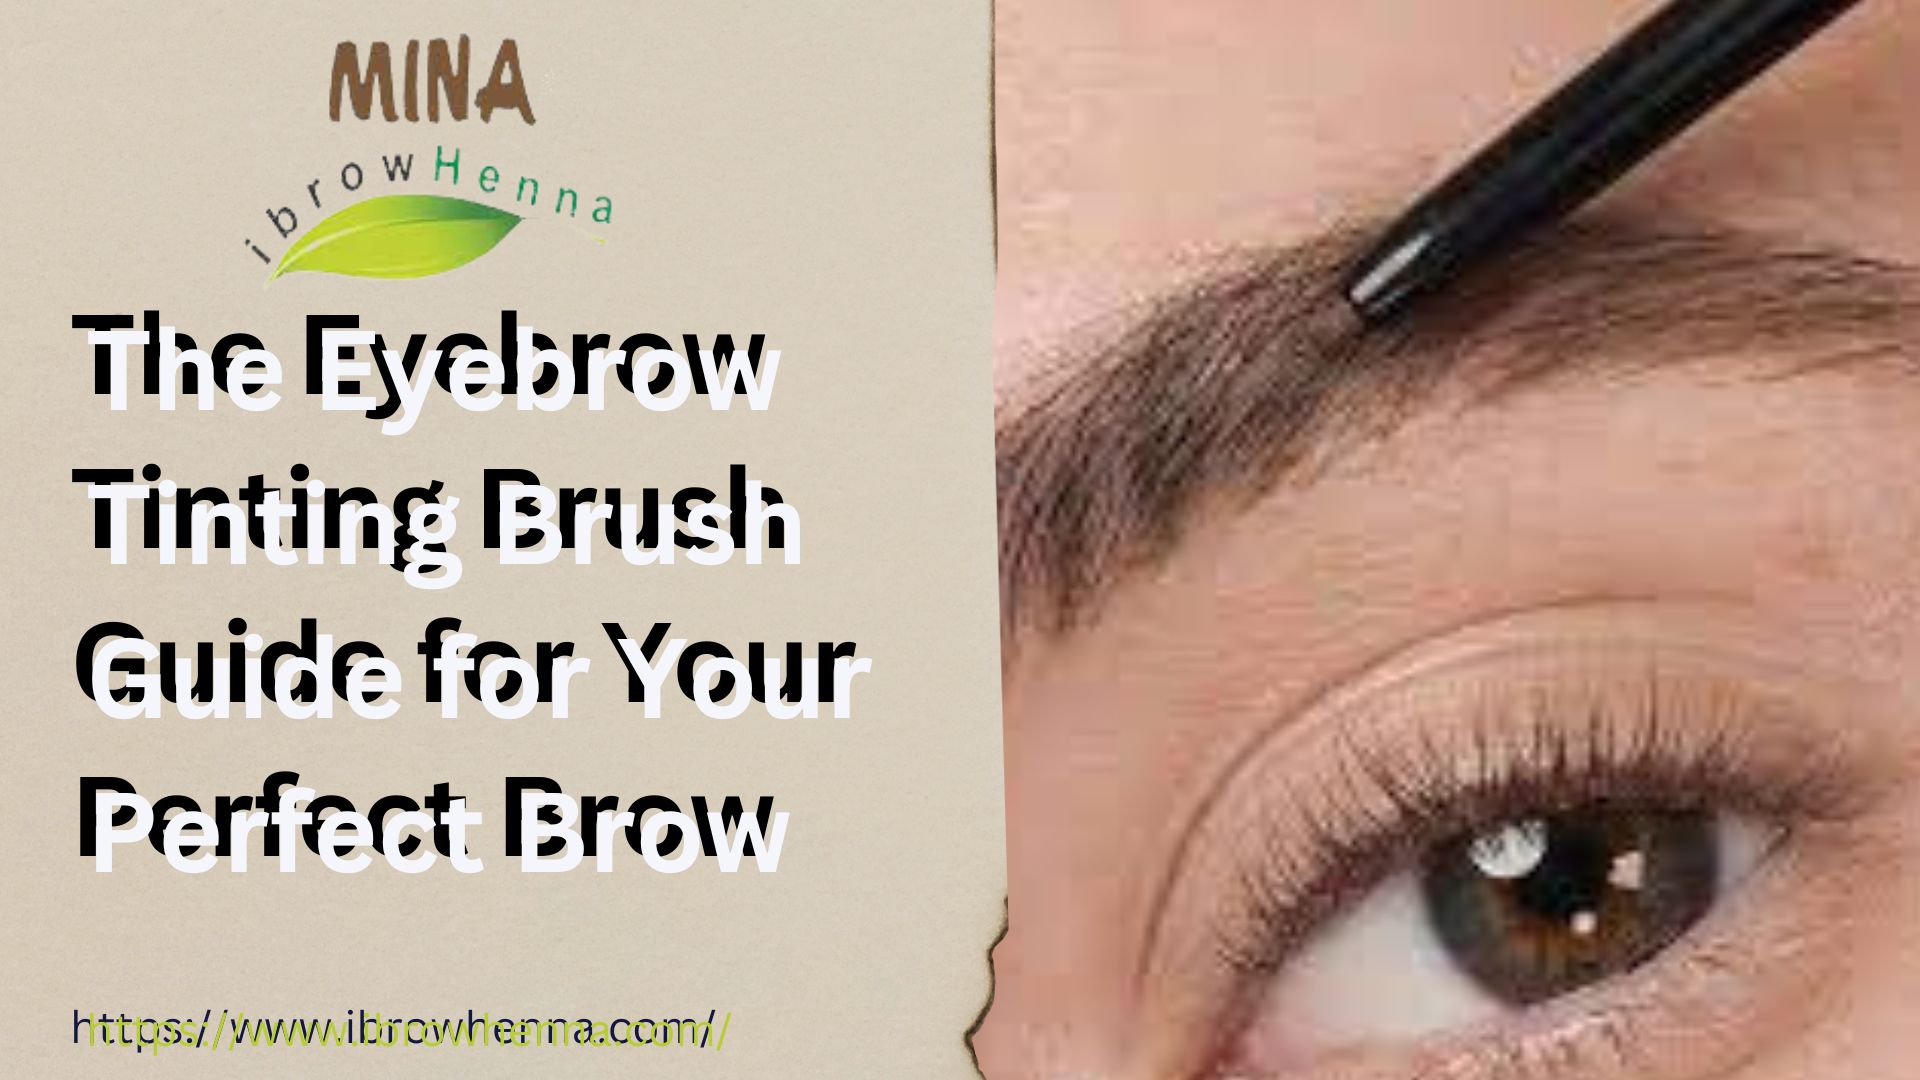 The Eyebrow Tinting Brush Guide for Your Perfect Brow